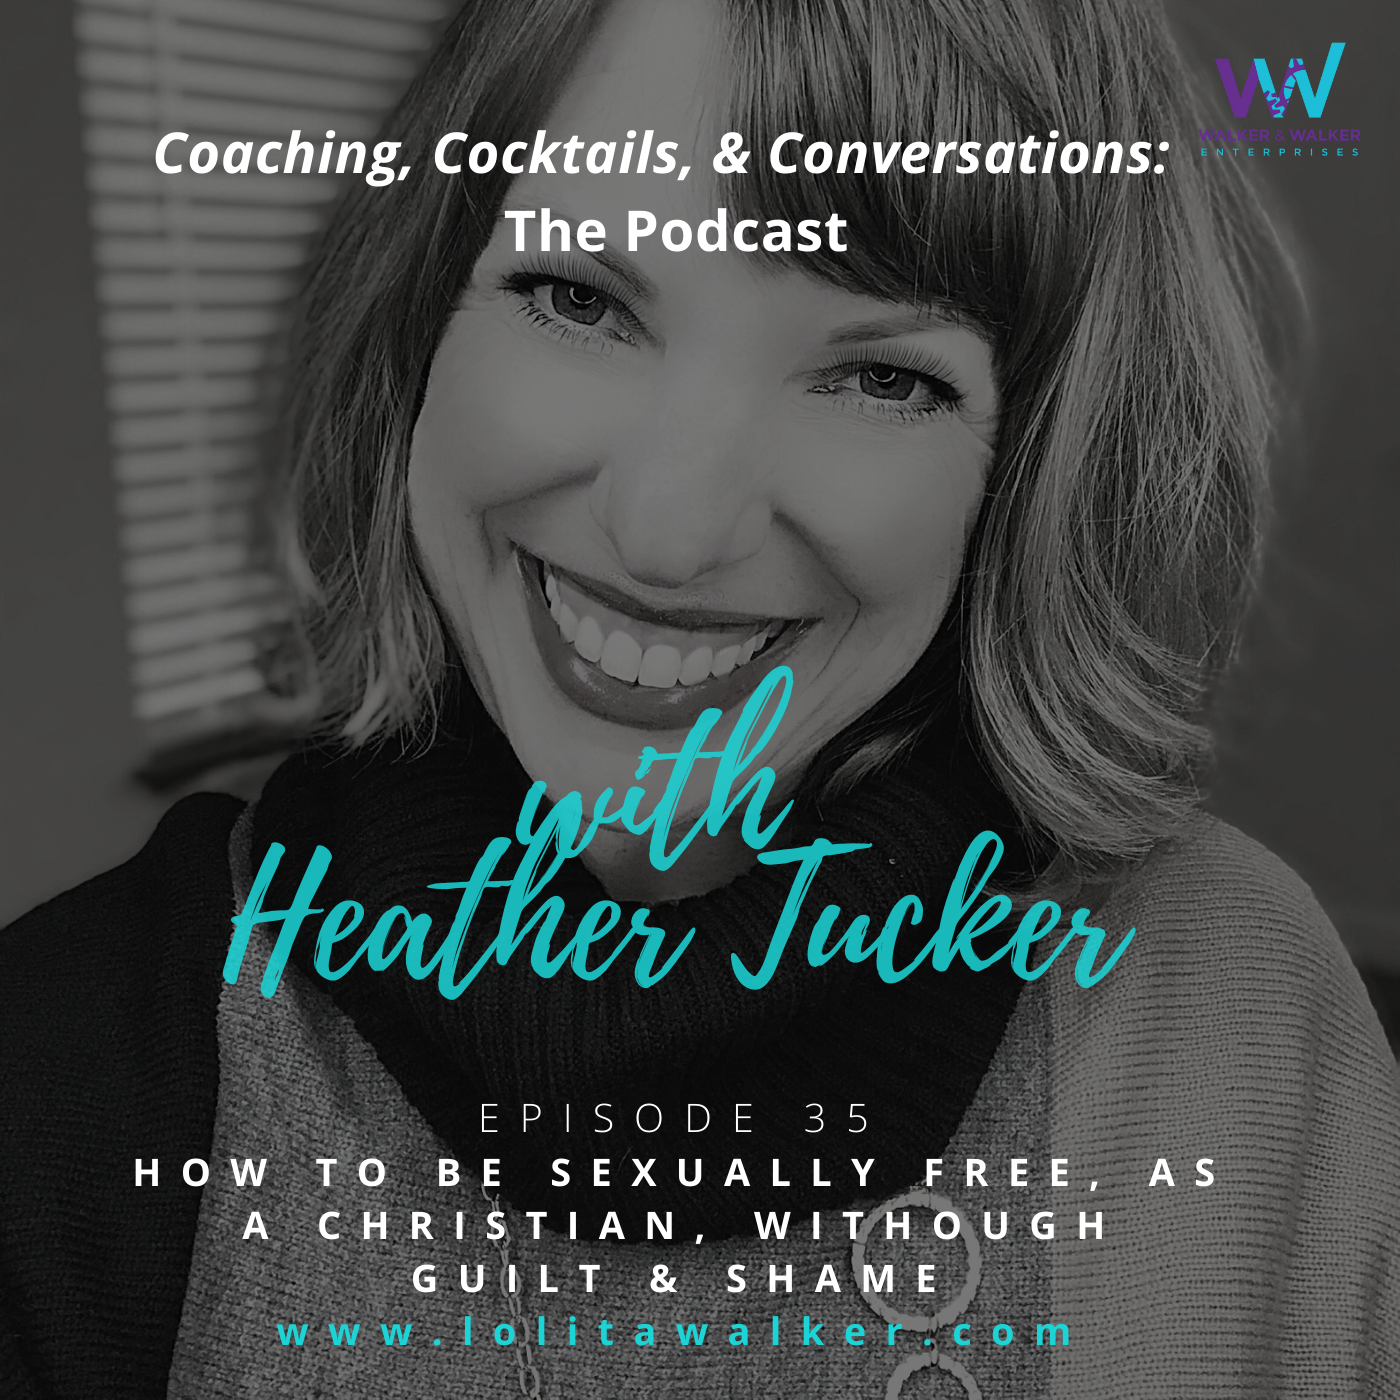 S2E35 - How To Be Sexually Free, As a Christian, Without Guilt or Shame (with Heather Tucker)